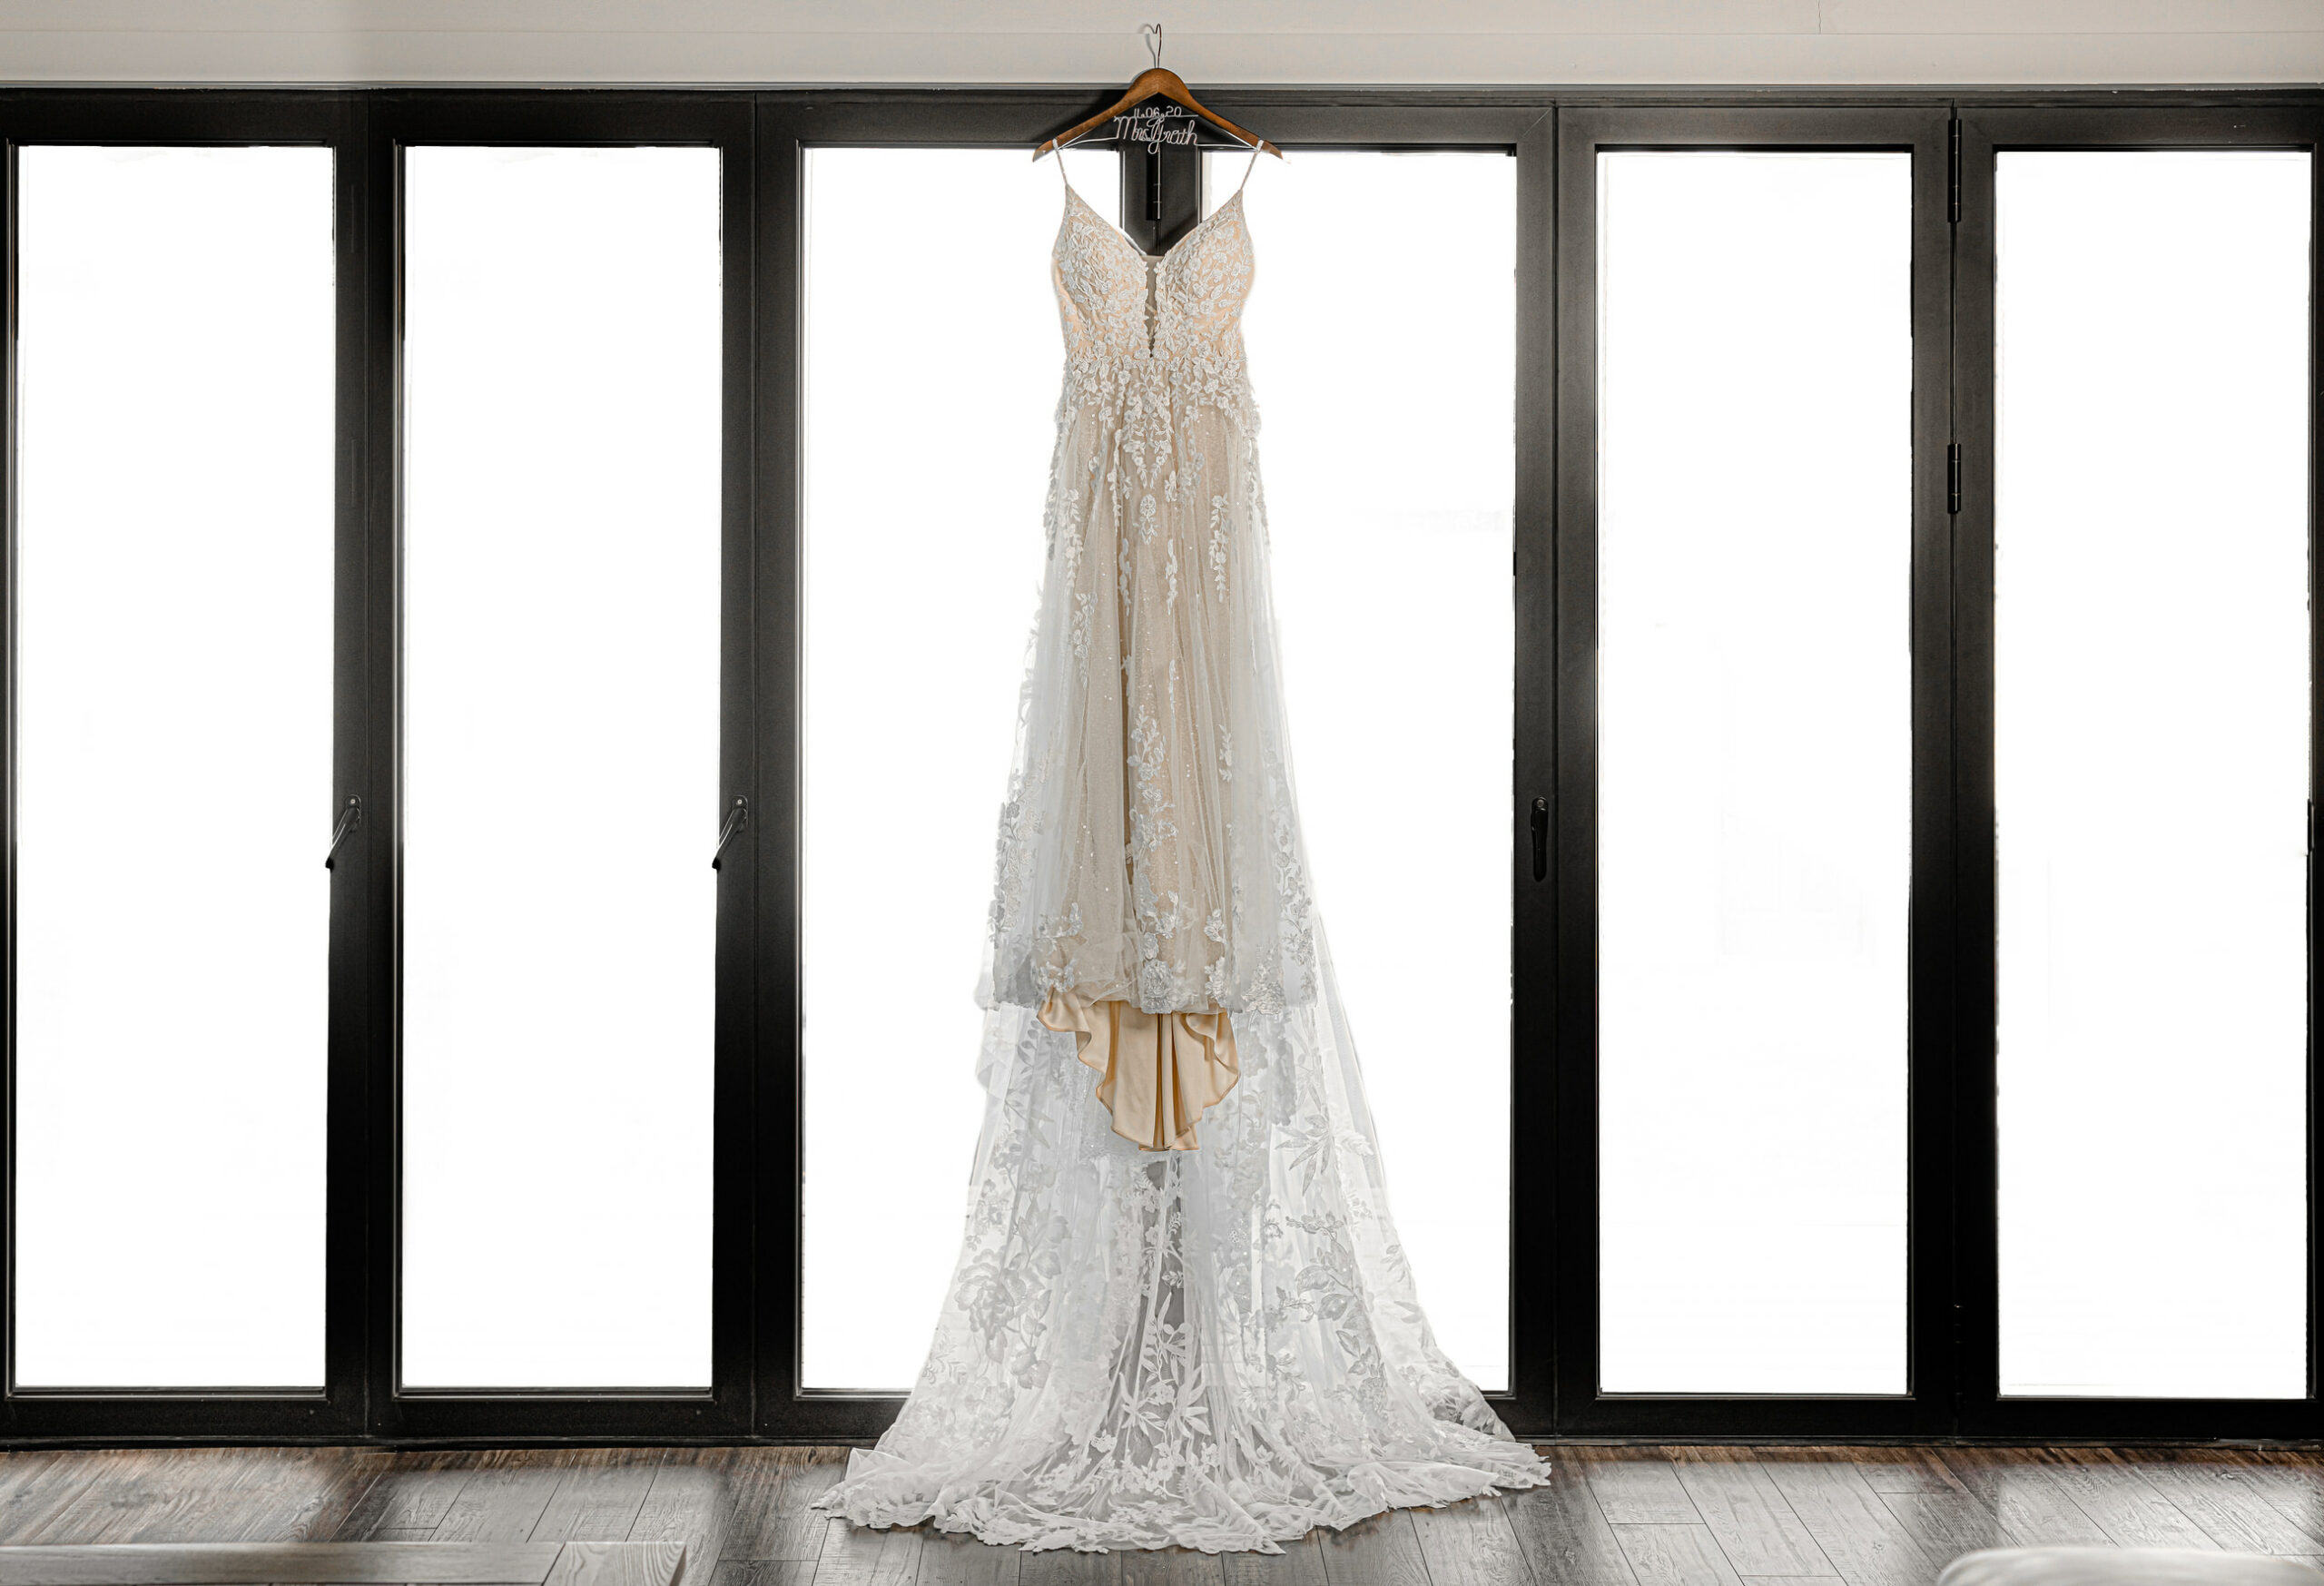 Bridal Gowns in Indianapolis, IN